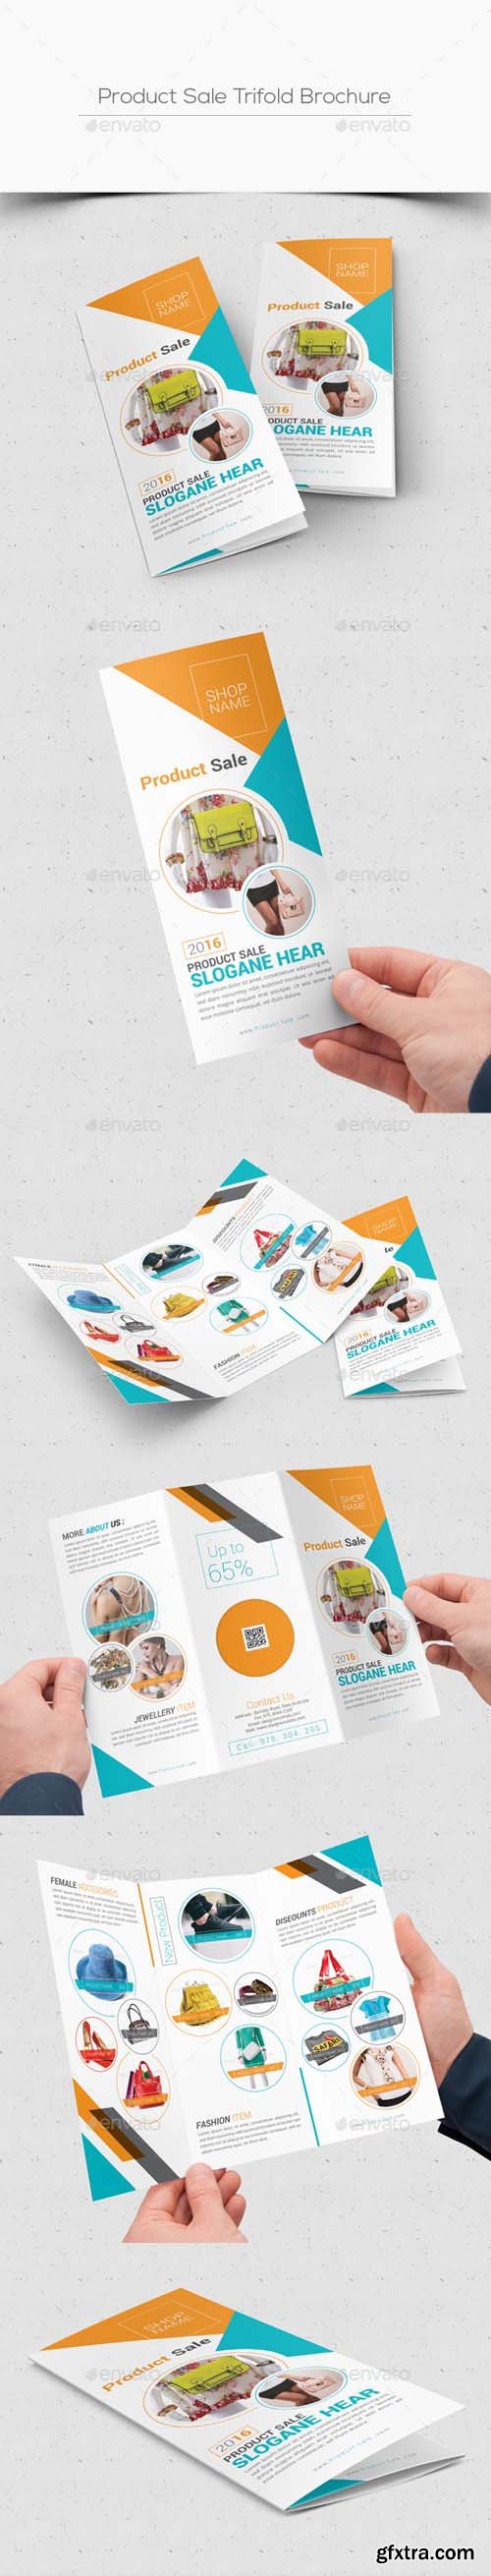 GR - Product Sale Trifold Brochure 17869873